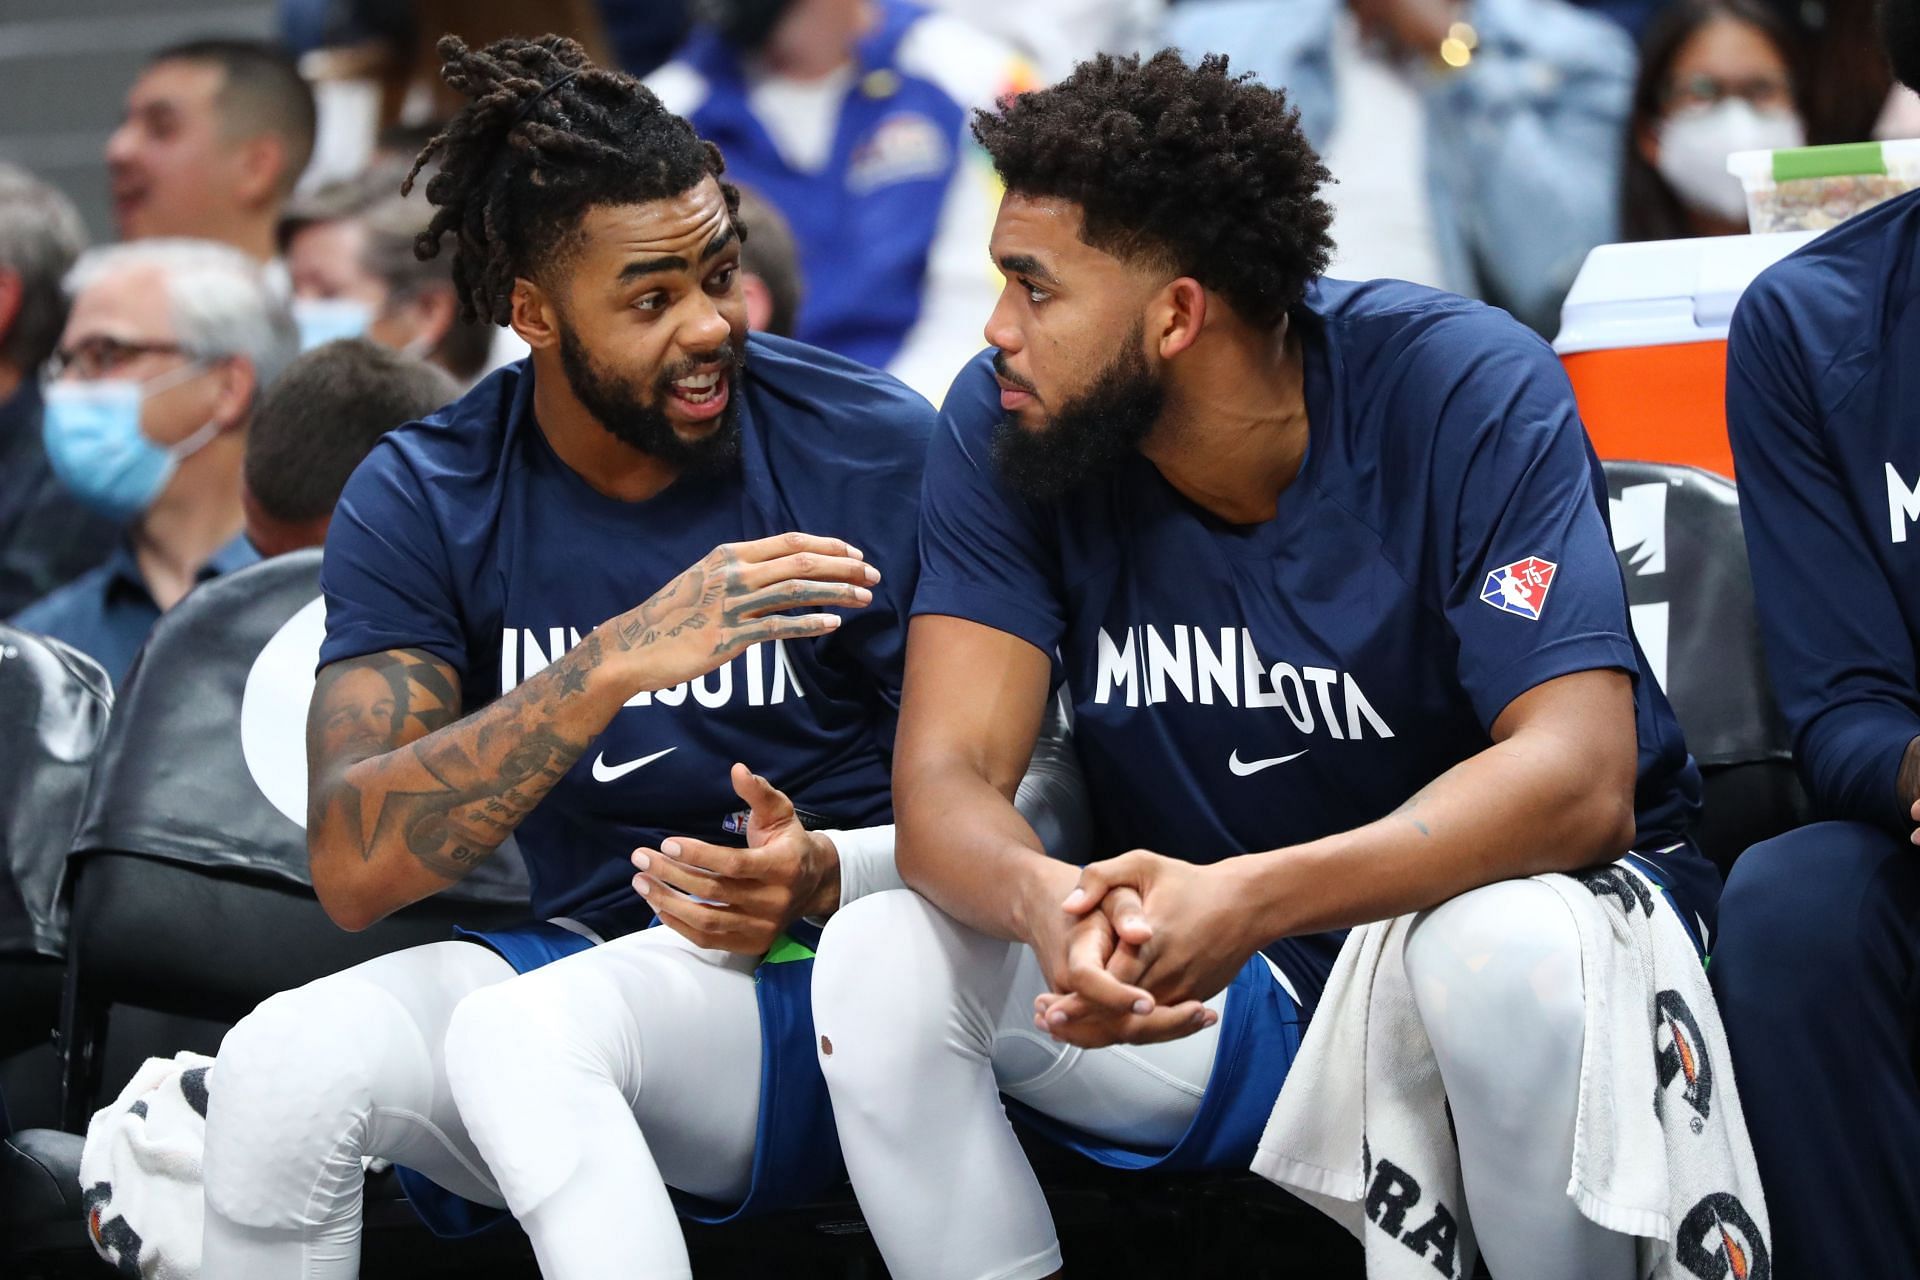 D&#039;Angelo Russell discusses the game with Minnesota Timberwolves teammate Karl-Anthony Towns